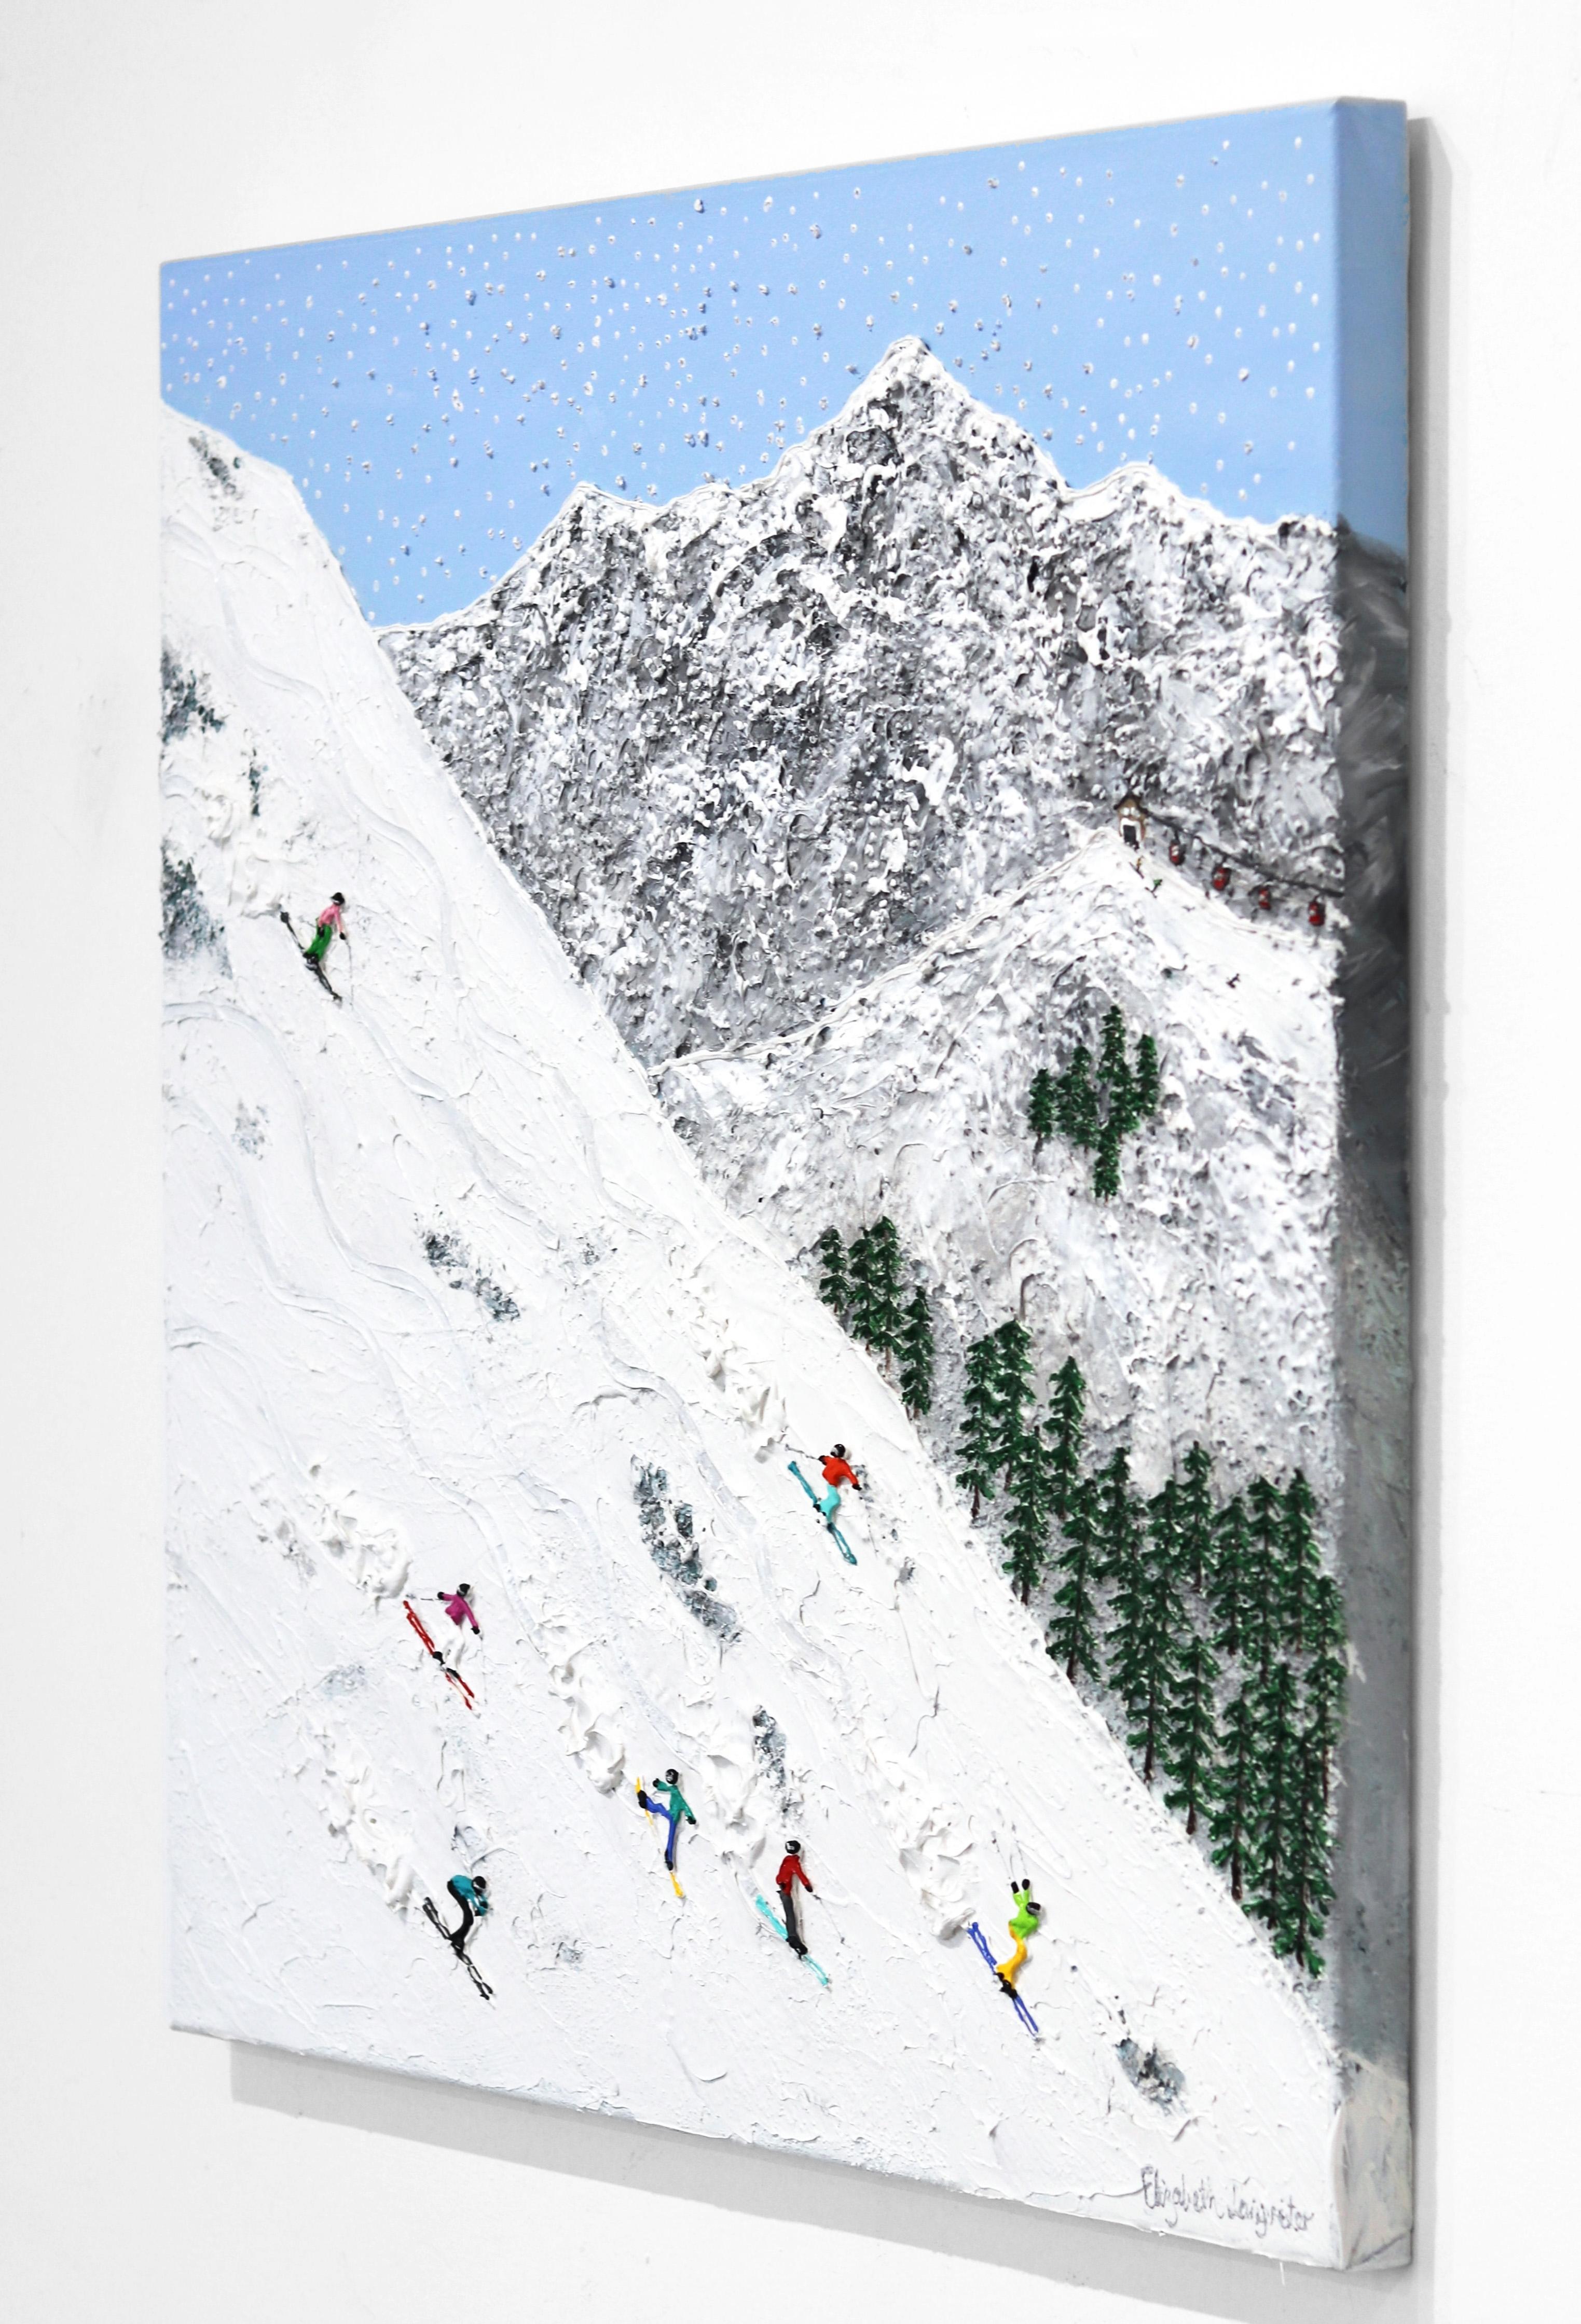 Wait For Me - Winter Landscape Textural Painting Skiers on Mountain - Gray Landscape Painting by Elizabeth Langreiter